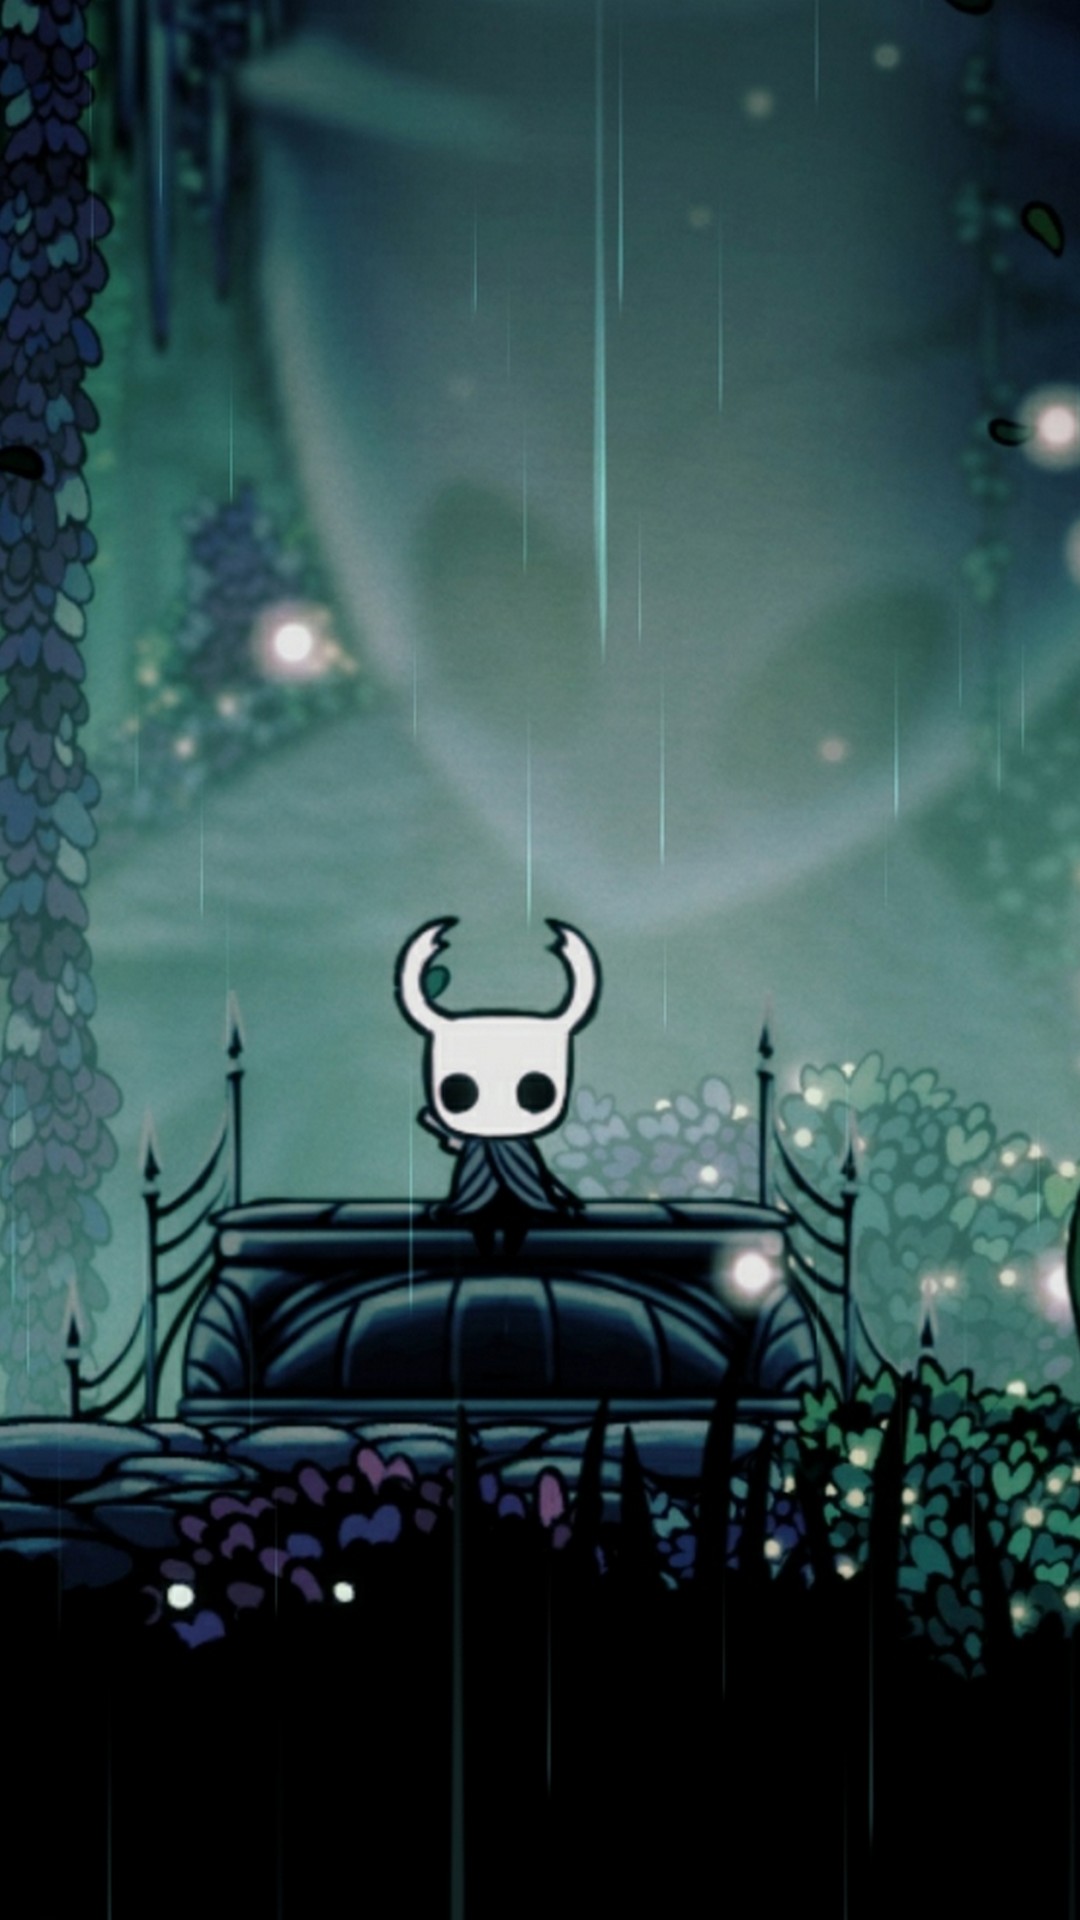 Hollow Knight Gameplay Wallpaper For Android With High Resolution Hollow Knight Backgrounds For Pc 1080x19 Wallpaper Teahub Io